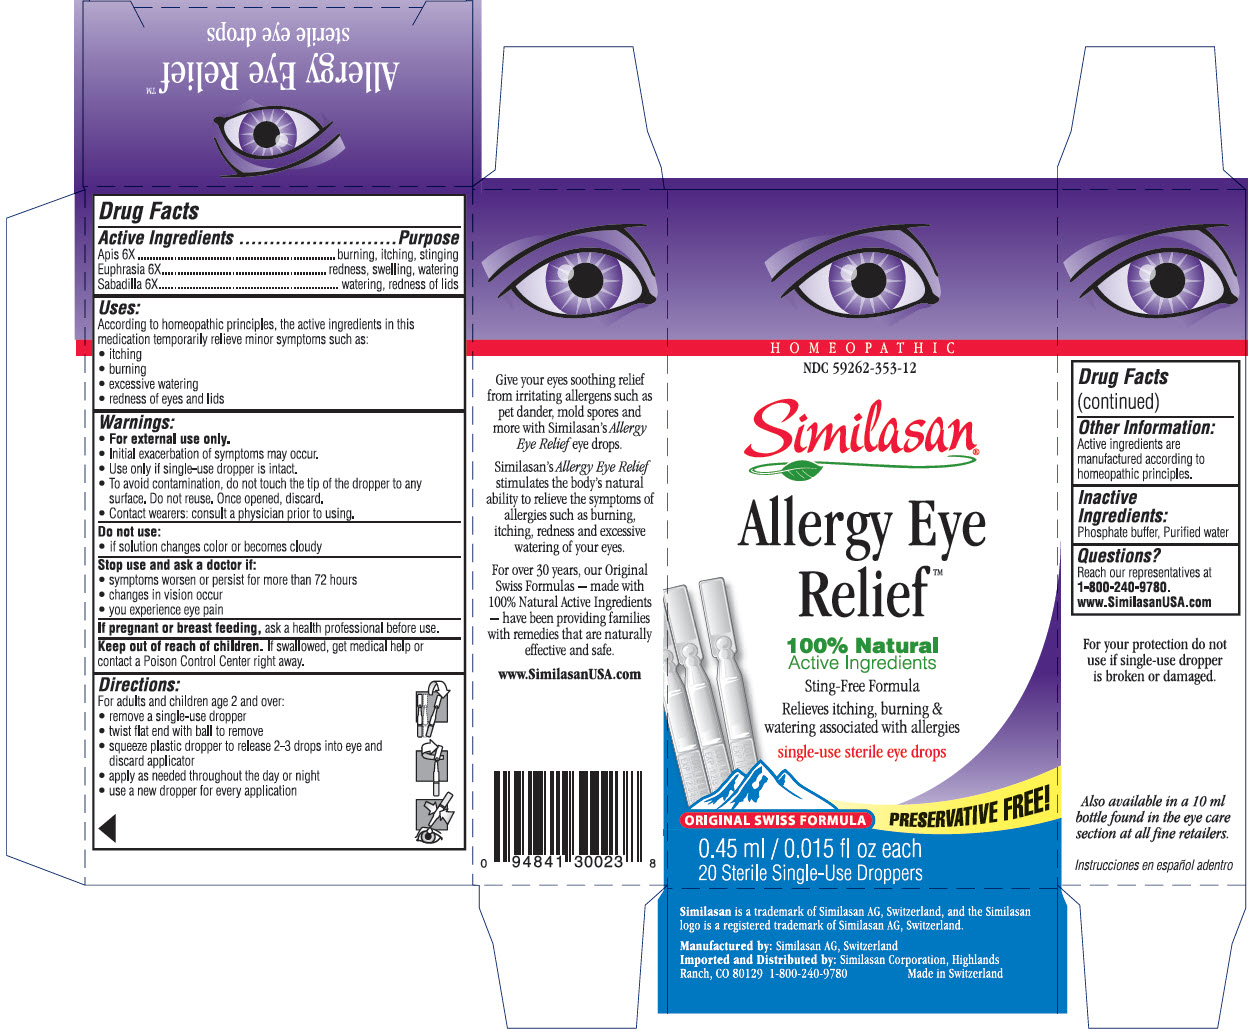 HOMEOPATHIC NDC 59262-353-12 Similasan Allergy Eye ReliefTM single-use sterile eye drops 0.45 ml 20 Sterile Single-Use Droppers